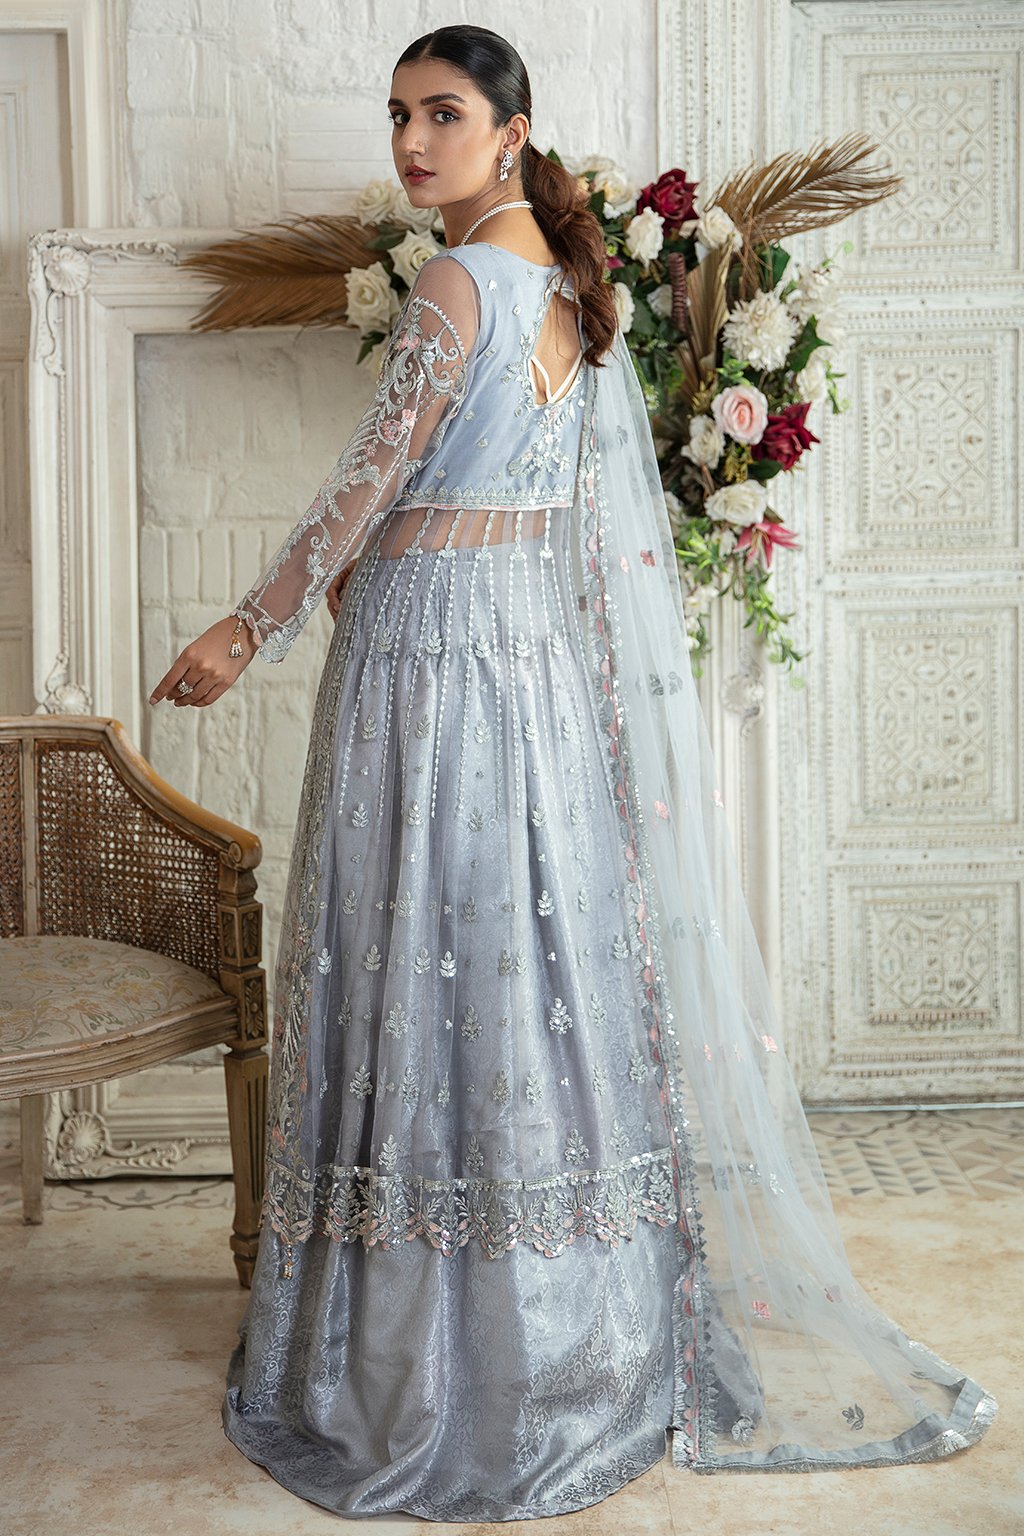 Emaan Adeel Embroidered Chiffon Dress Unstitched 3piece - LE 01